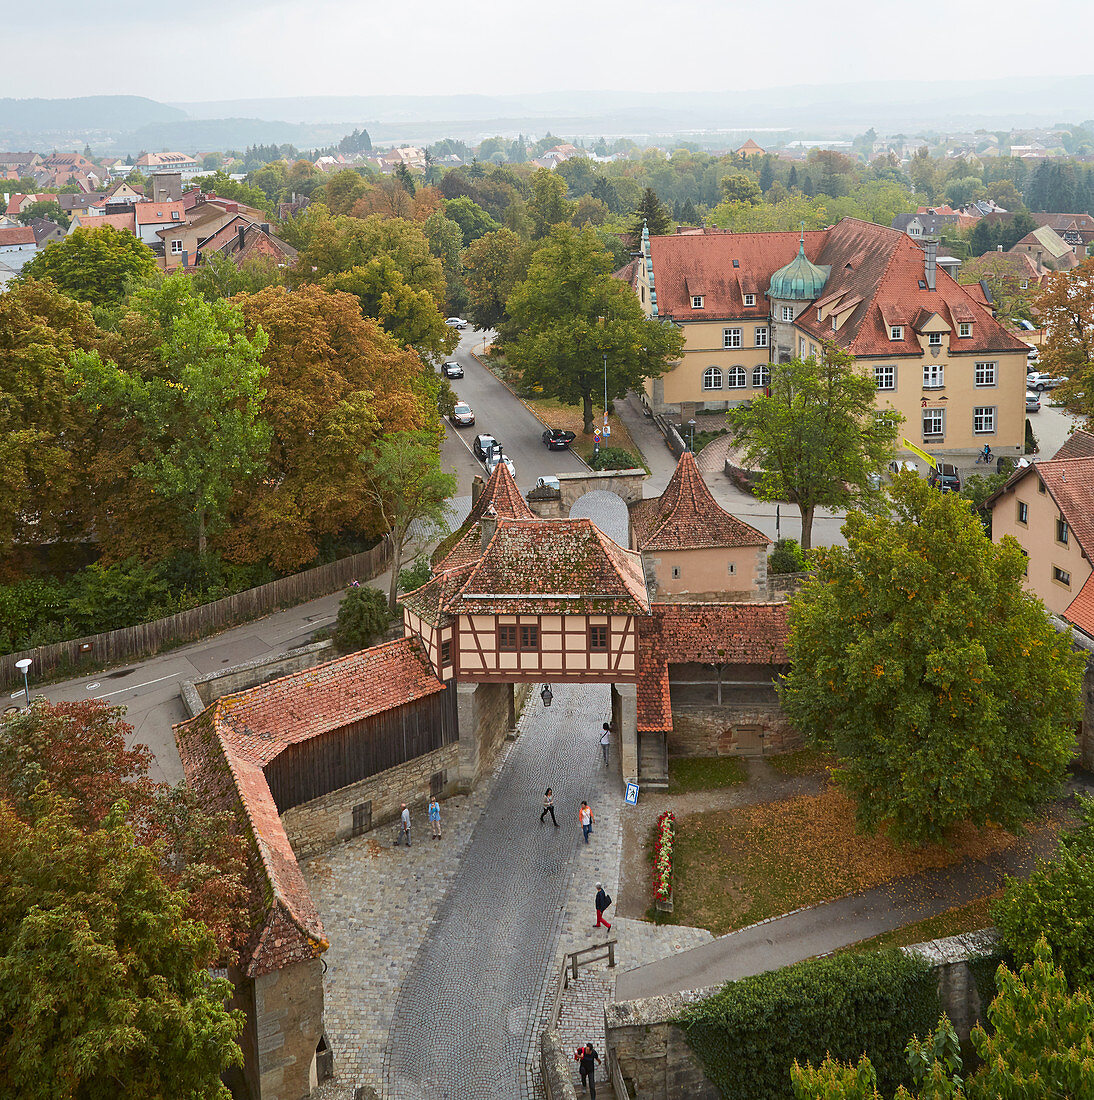 View from the R? Derturm to the old town, Rothenburg ob der Tauber, Romantic Road, Franconia, Bavaria, Germany, Europe